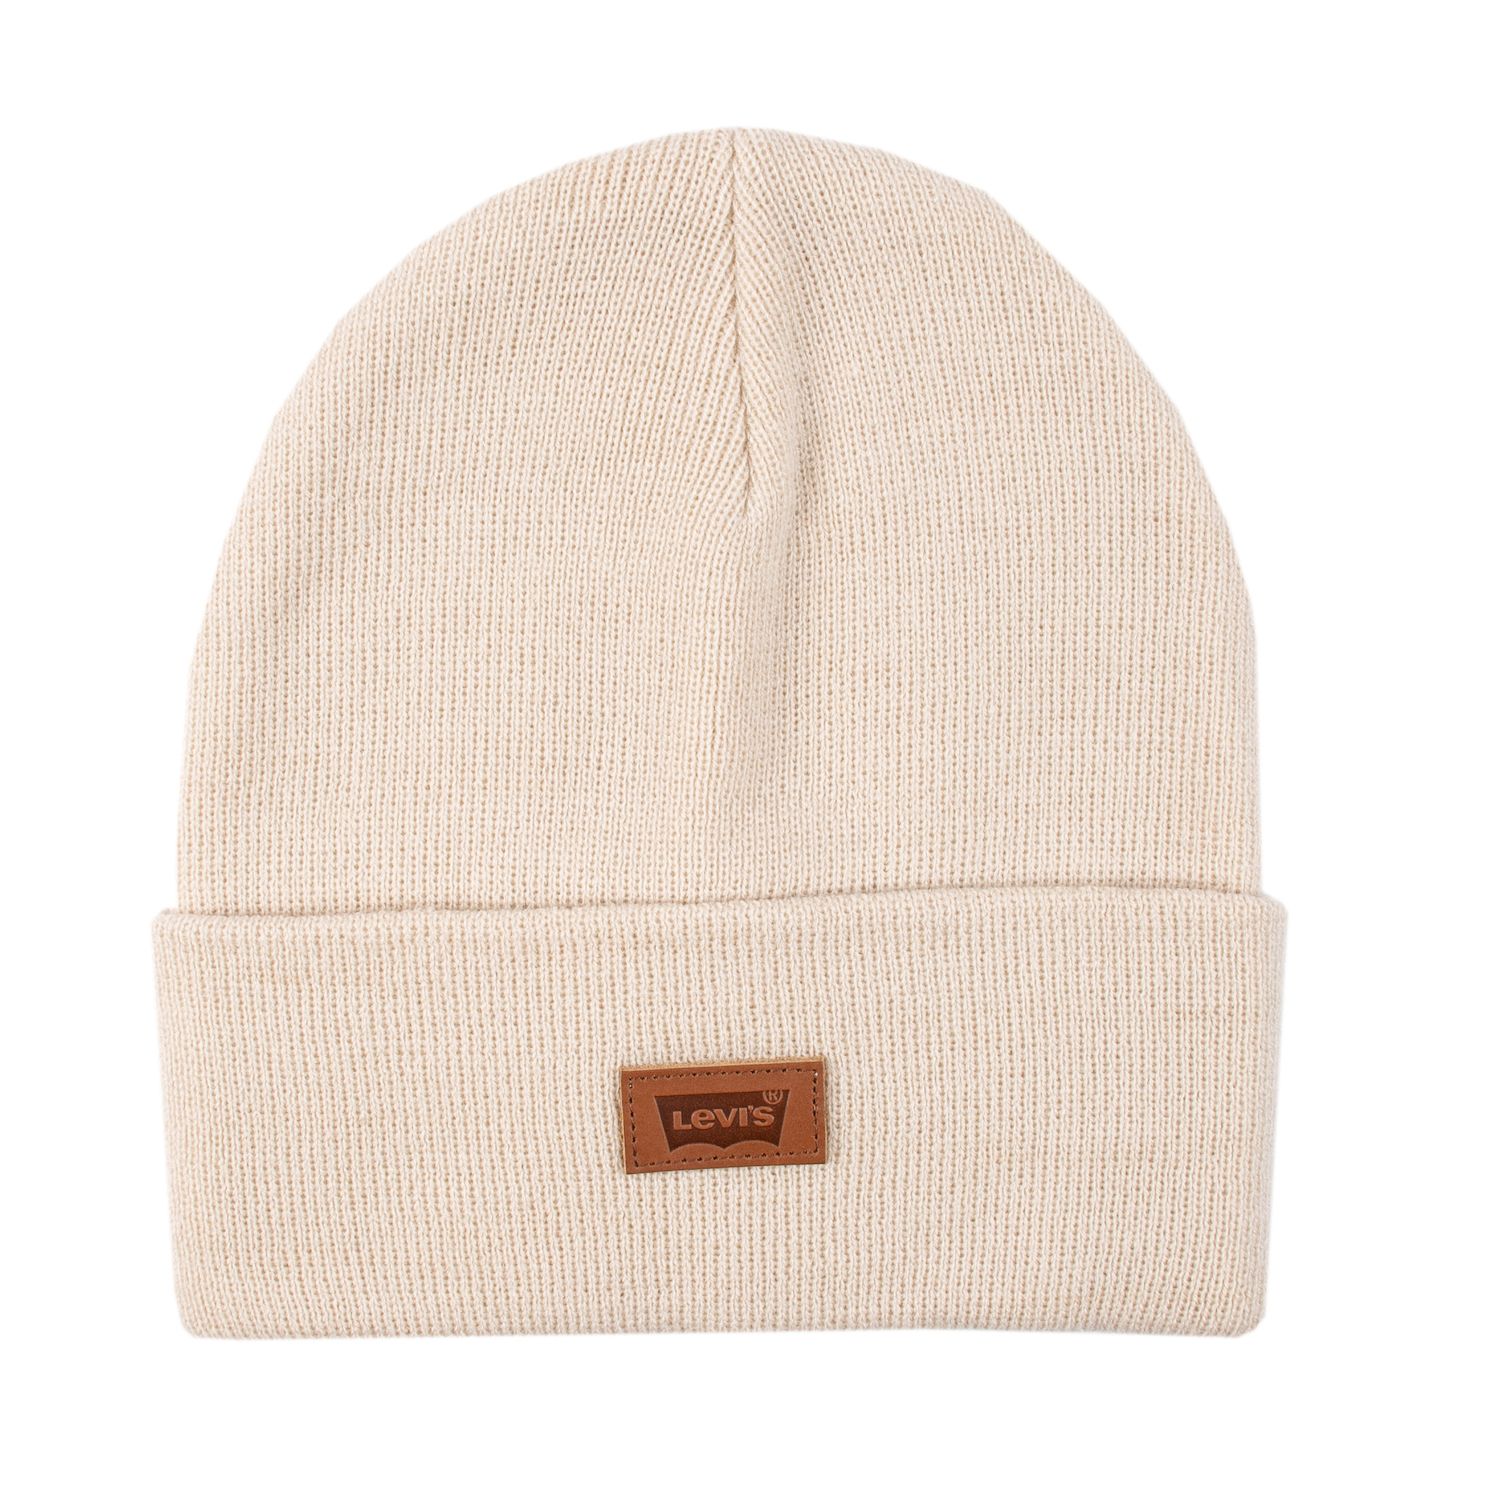 Image for Levi's Men's Knit Cuffed All Season Beanie at Kohl's.